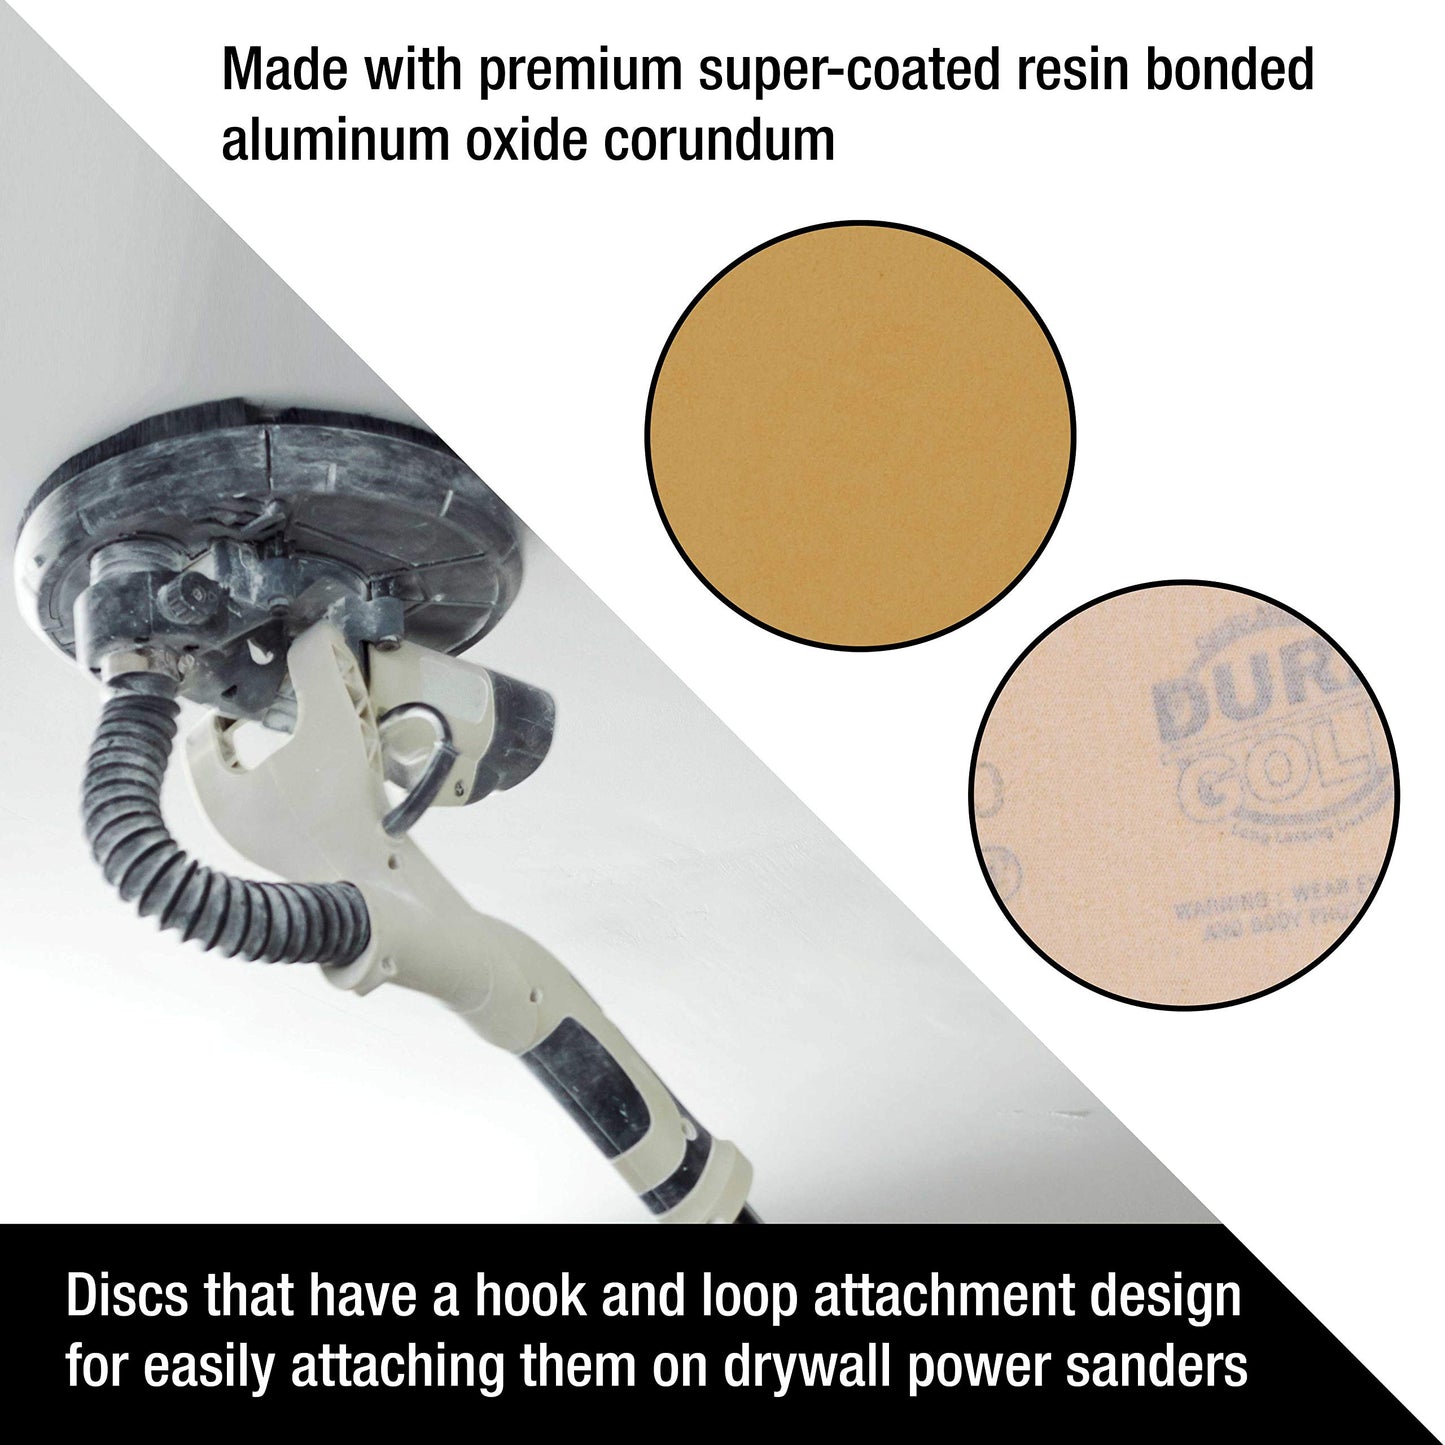 Dura-Gold Premium 9" Drywall Sanding Discs - 120 Grit (Box of 10) - High-Performance Sandpaper Discs with Hook & Loop Backing, Fast Cutting Aluminum